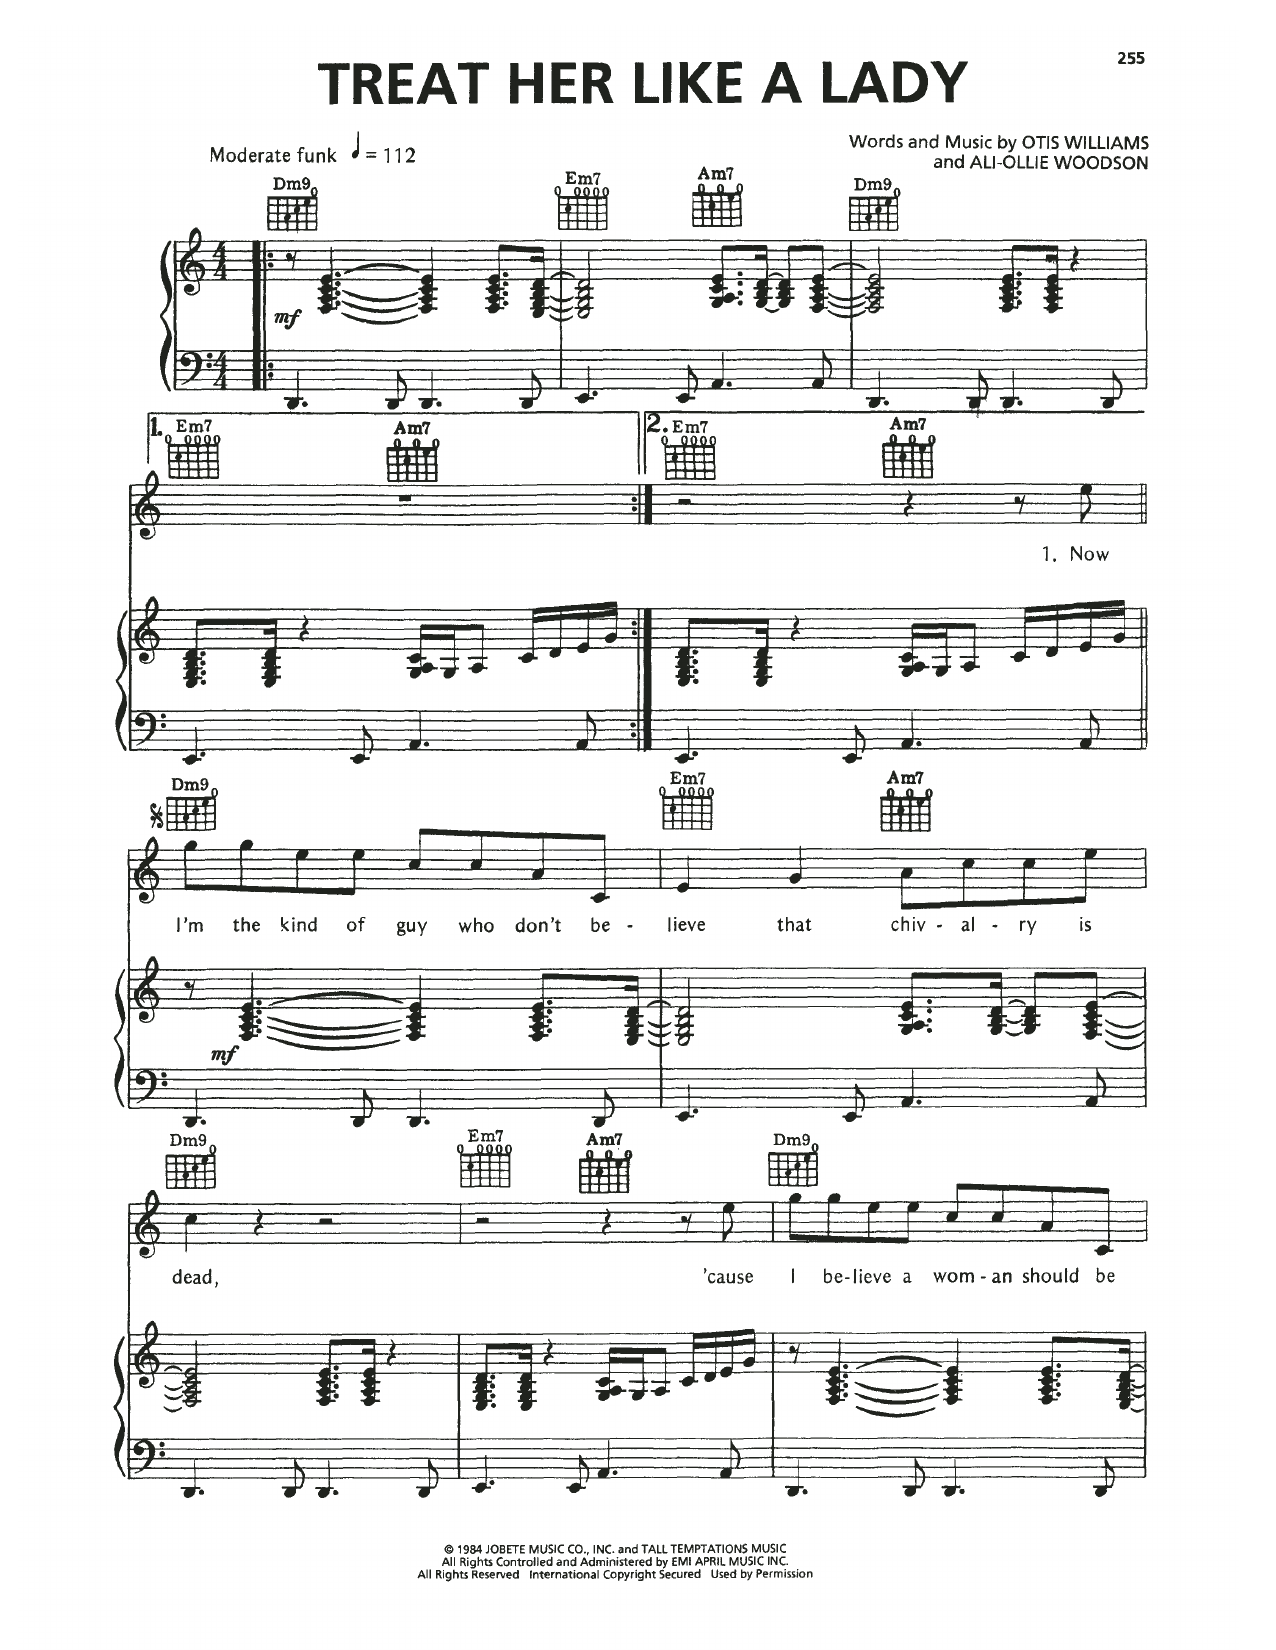 Download The Temptations Treat Her Like A Lady Sheet Music